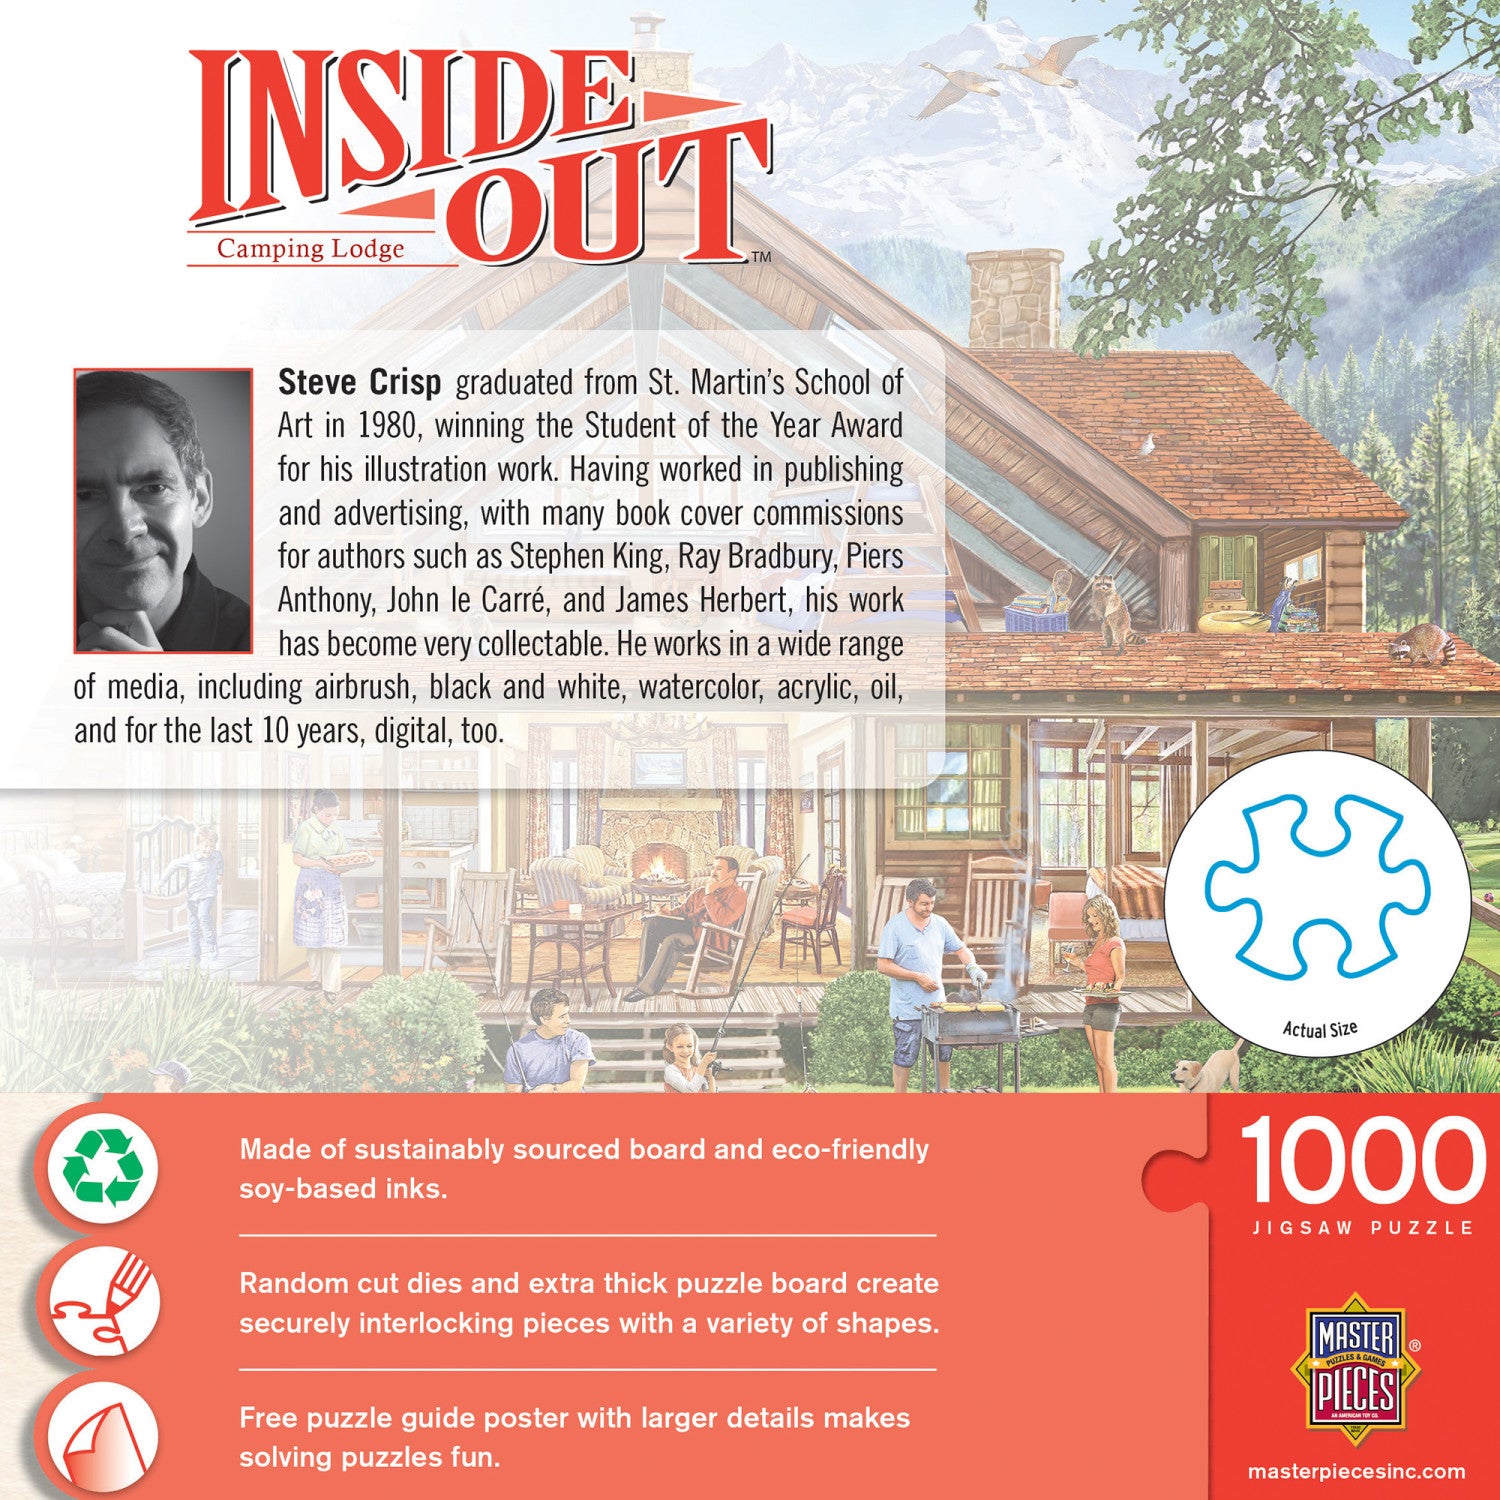 Inside Out - Camping Lodge 1000 Piece Jigsaw Puzzle